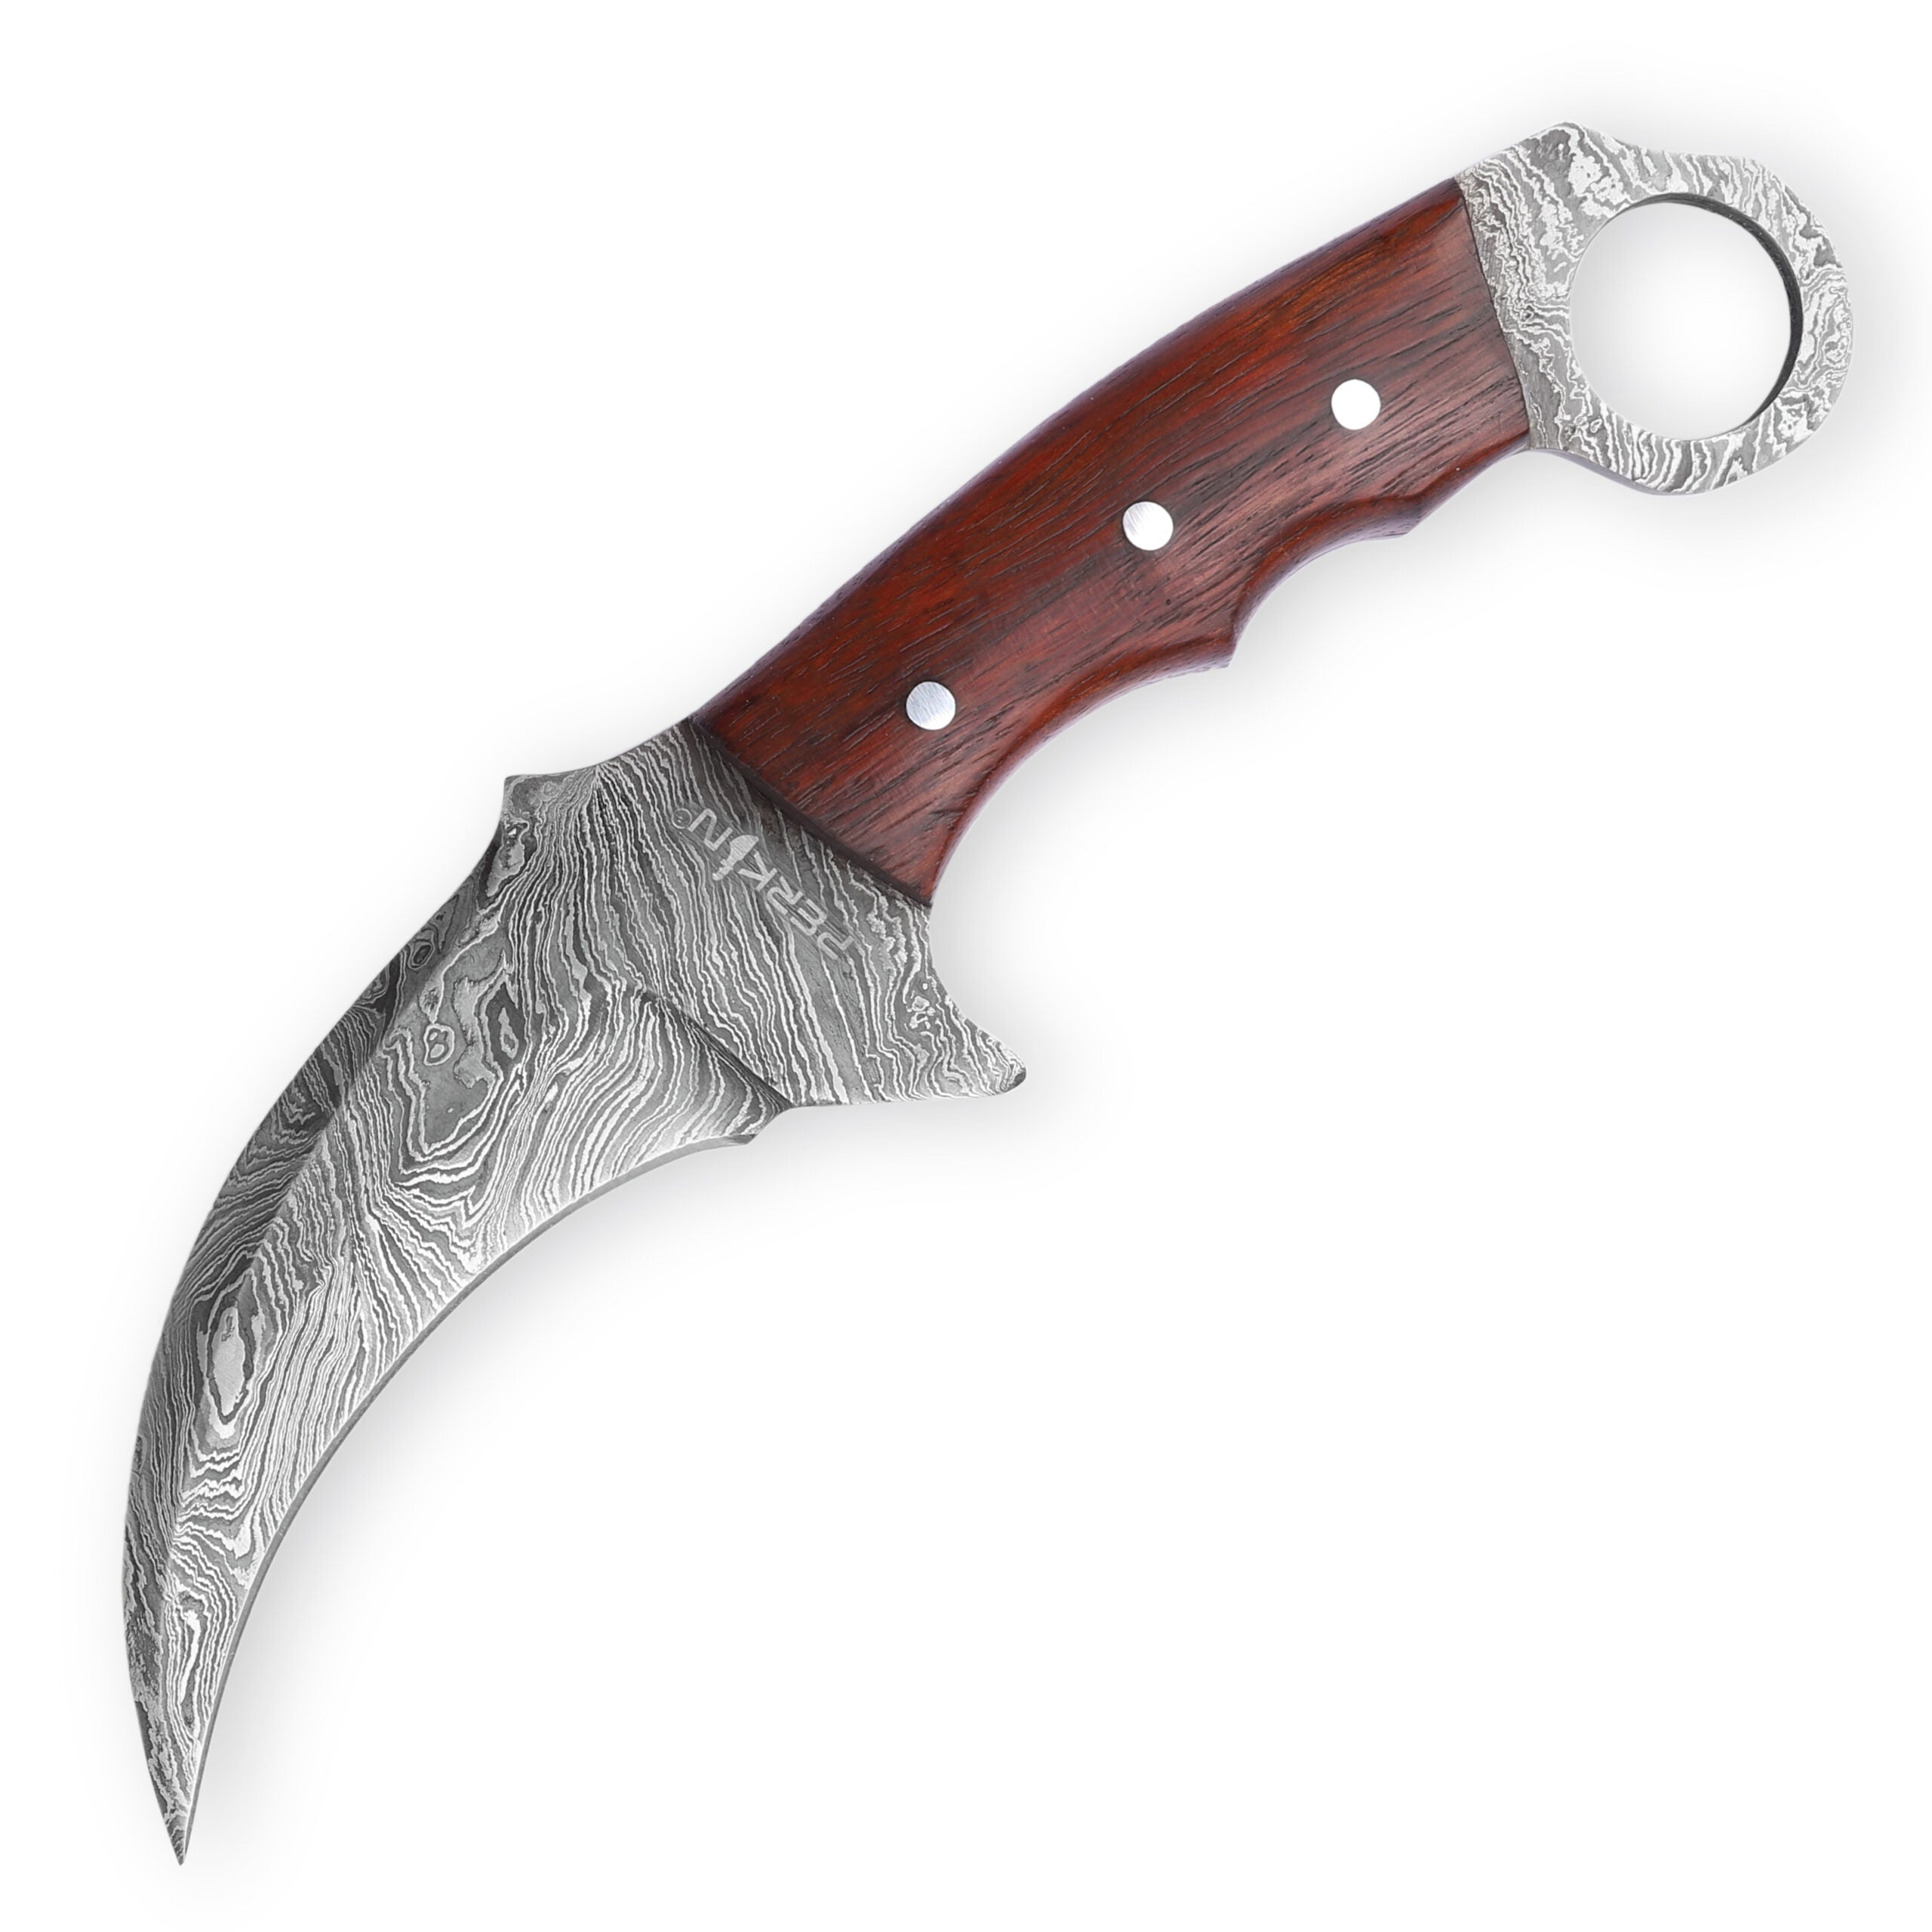  Hunting Knife KATRAN with Damascus Steel Fixed Blade